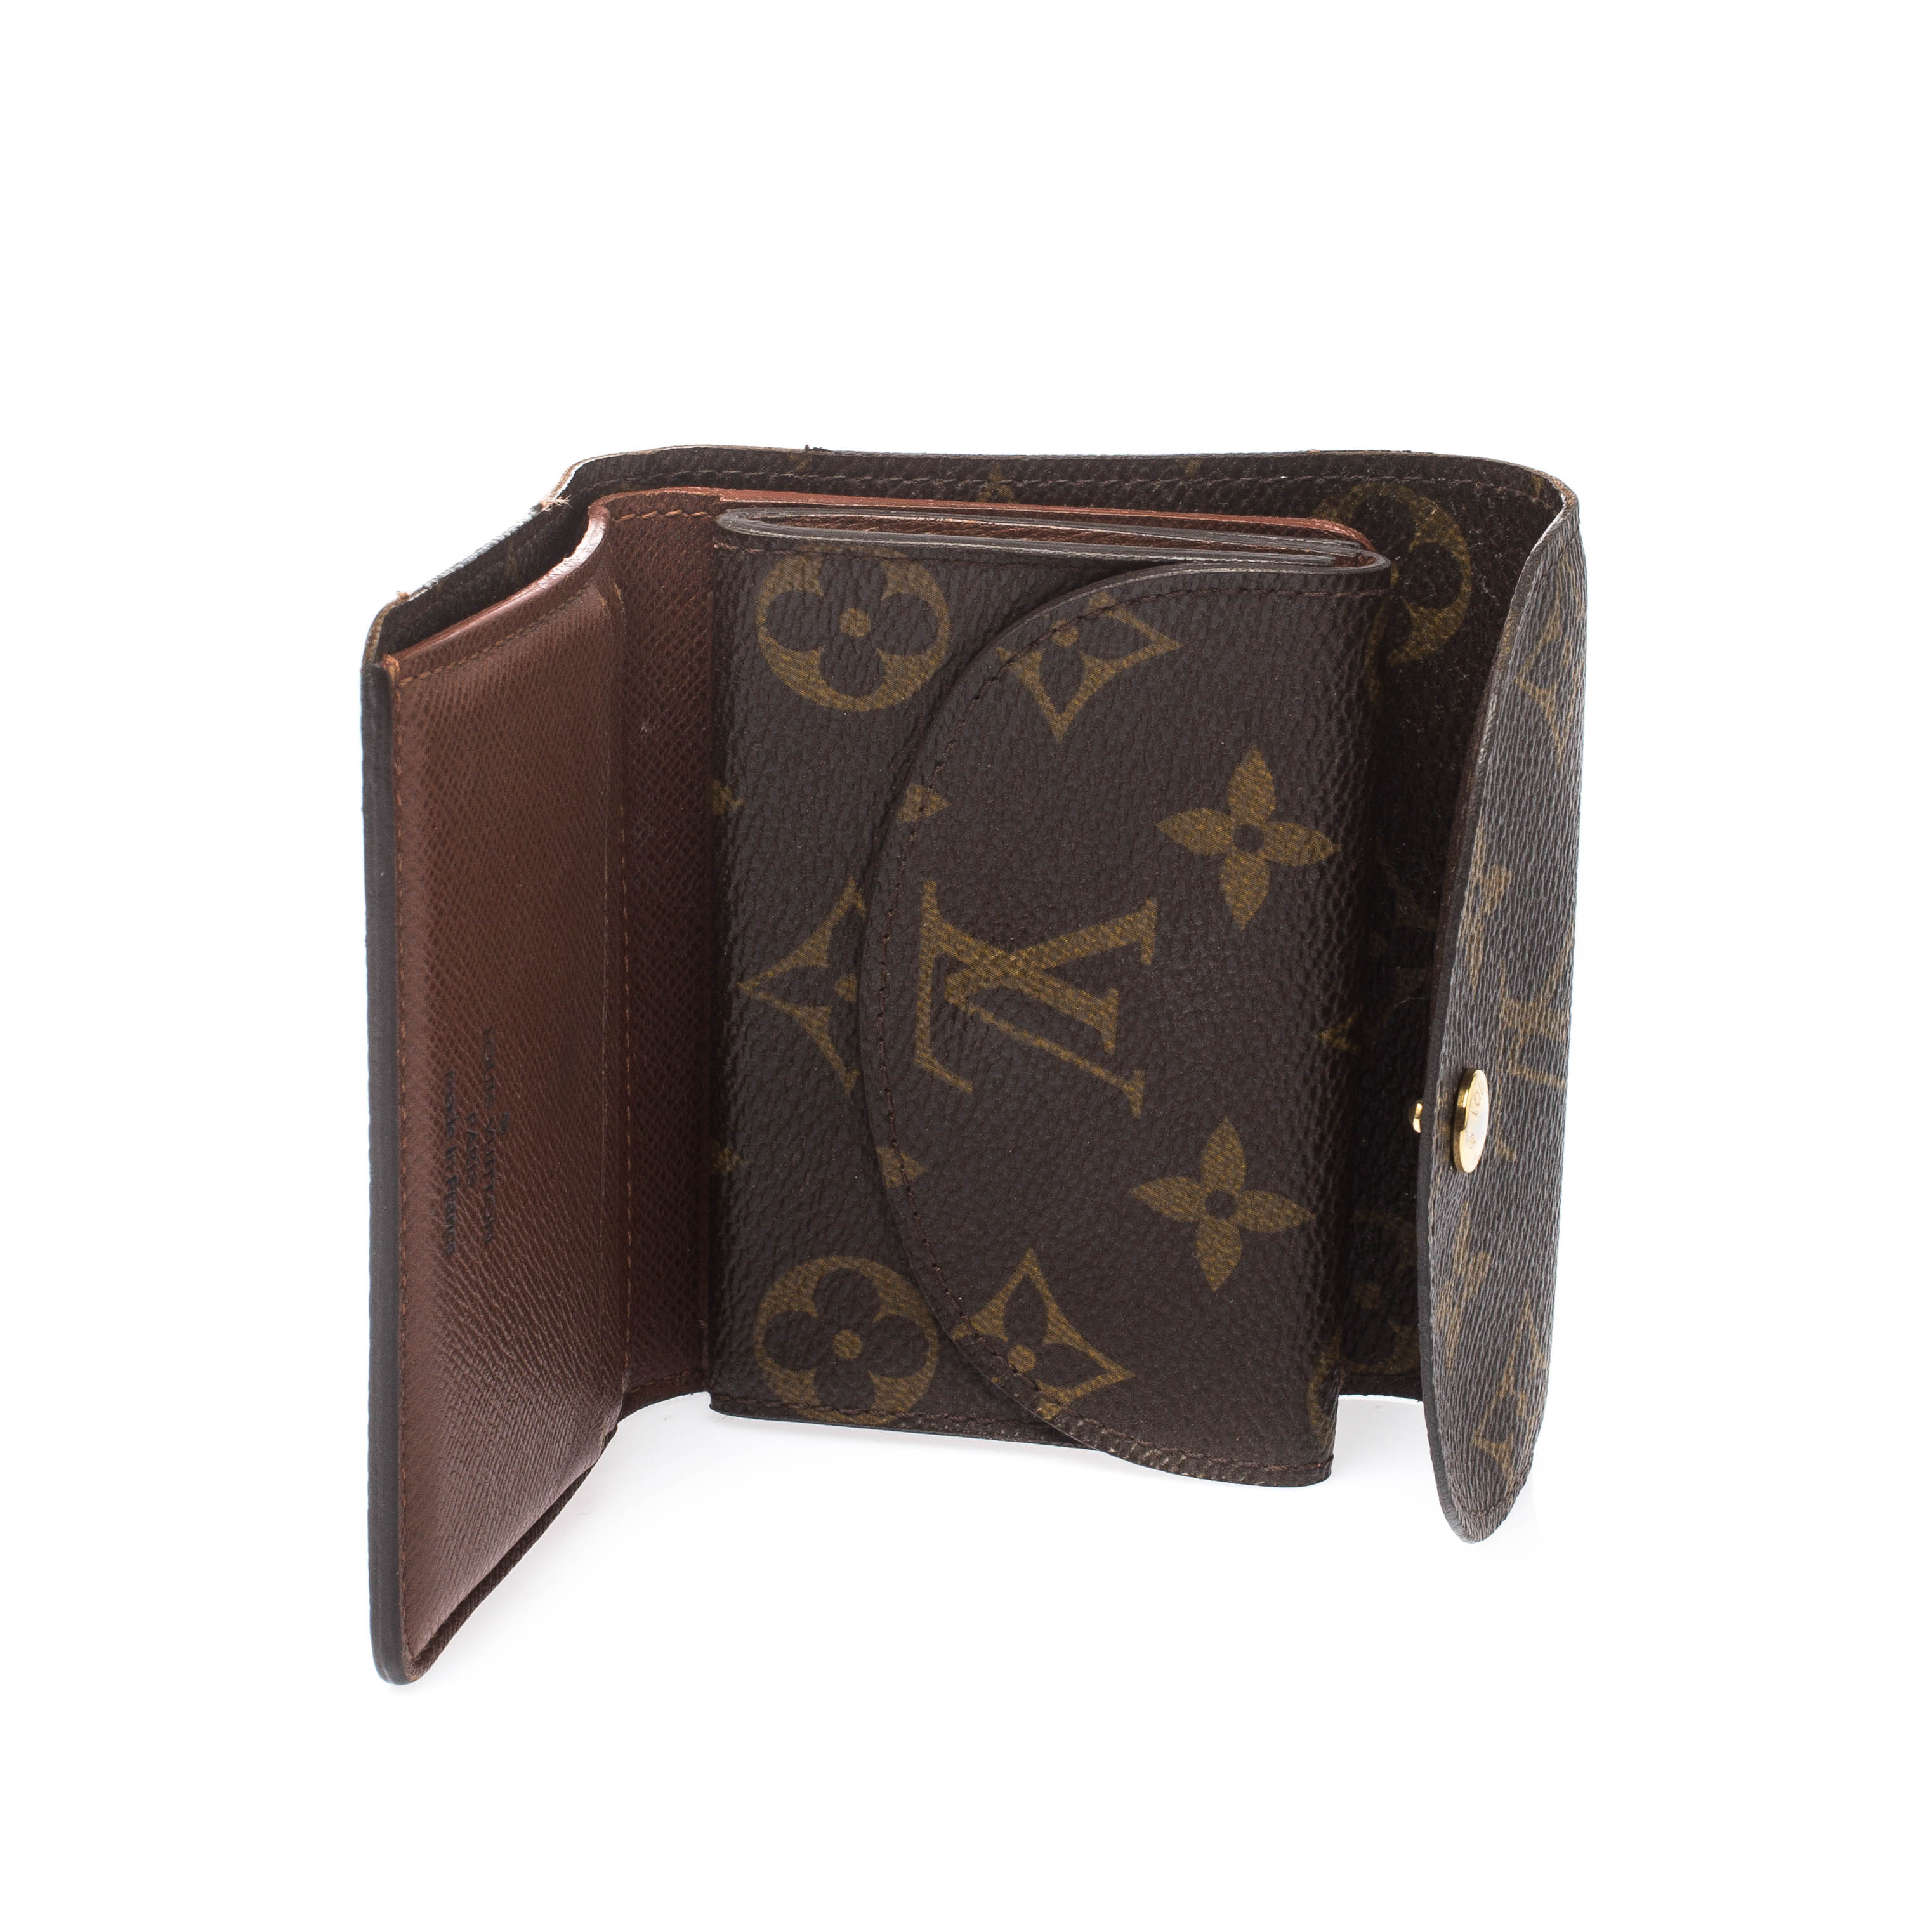 Buy Pre-owned & Brand new Luxury Louis Vuitton Clemence Monogram Canvas  Wallet Online